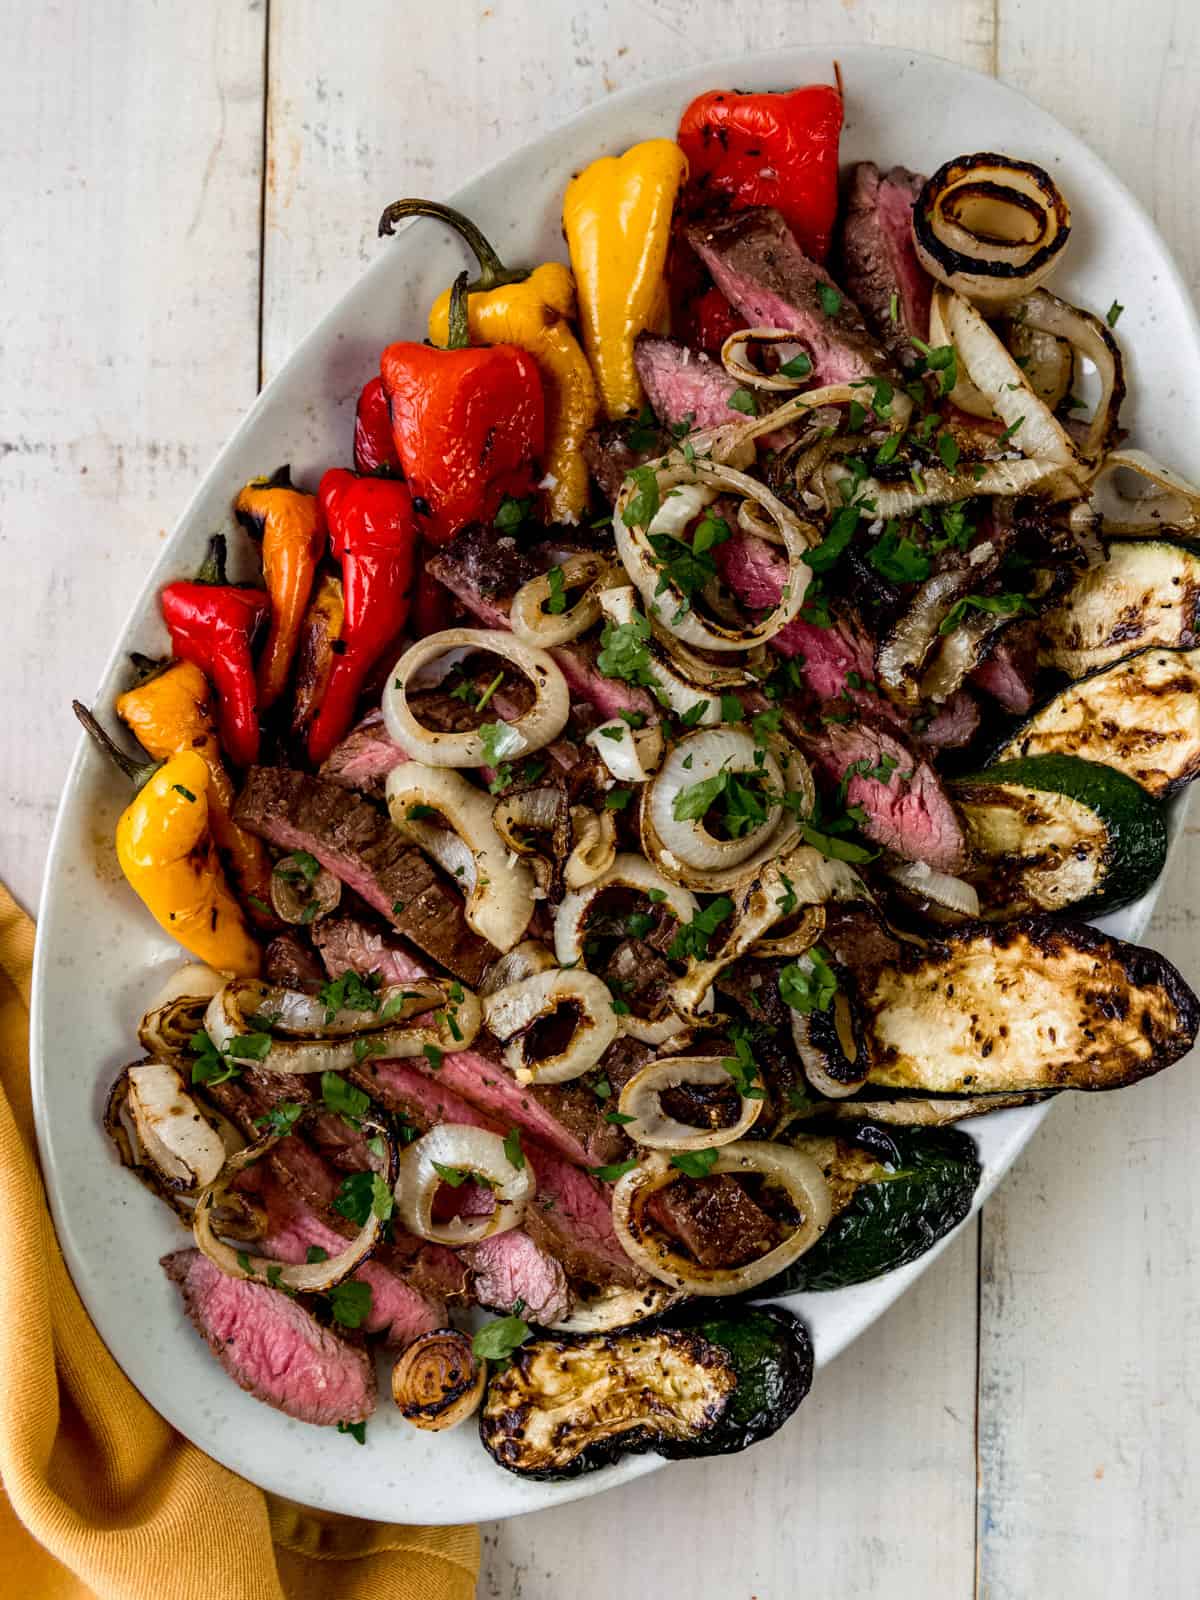 Grilled flank steak with grilled vegetables.